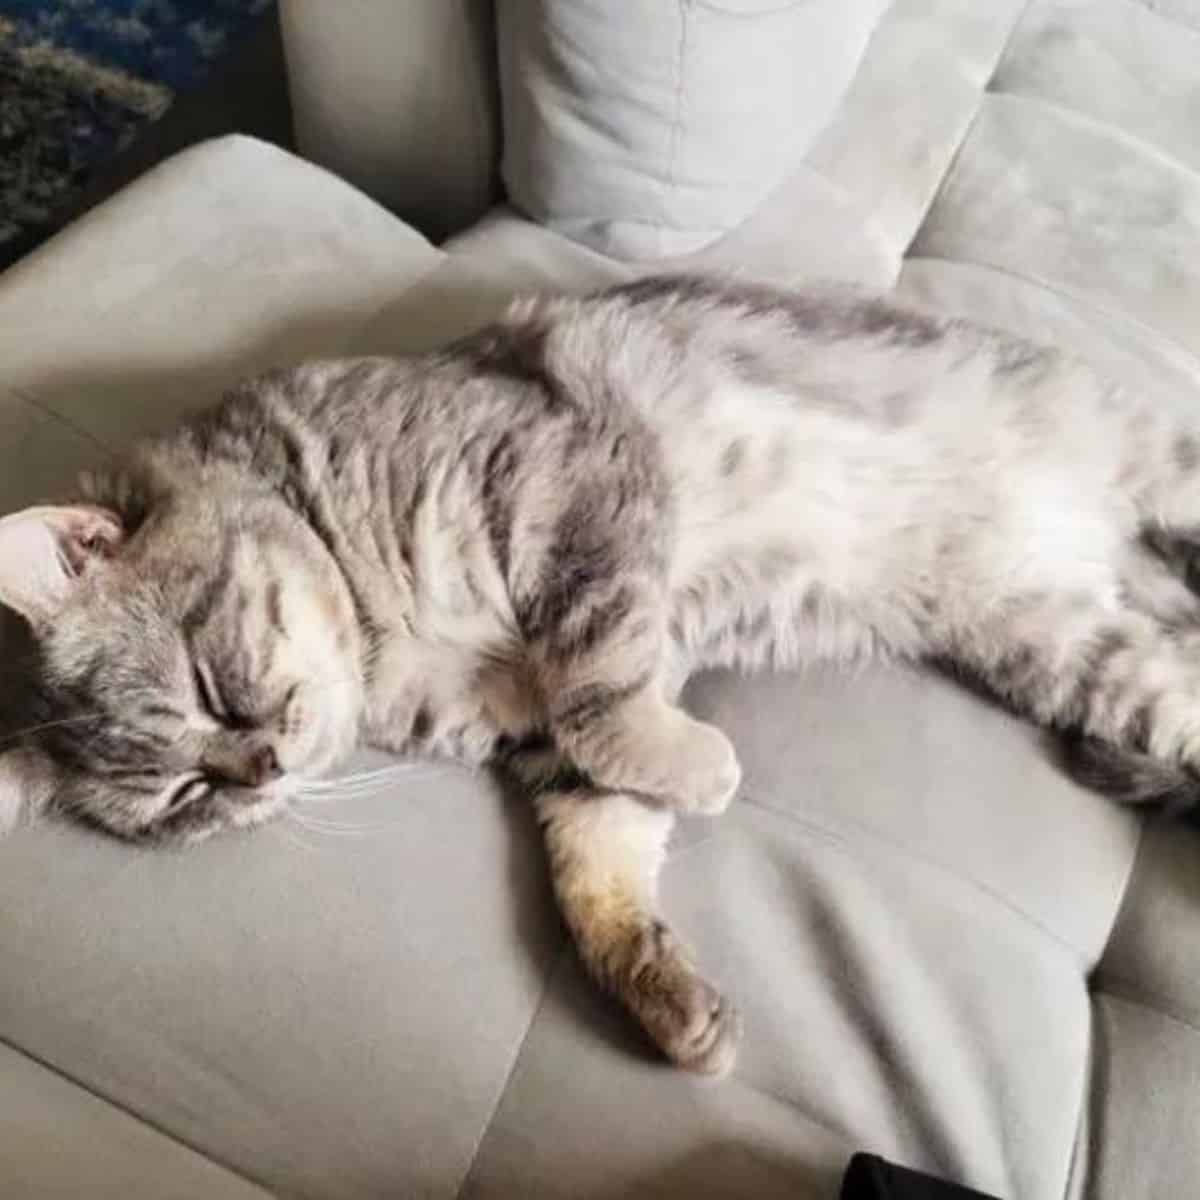 the rescued cat is lying and sleeping on the couch